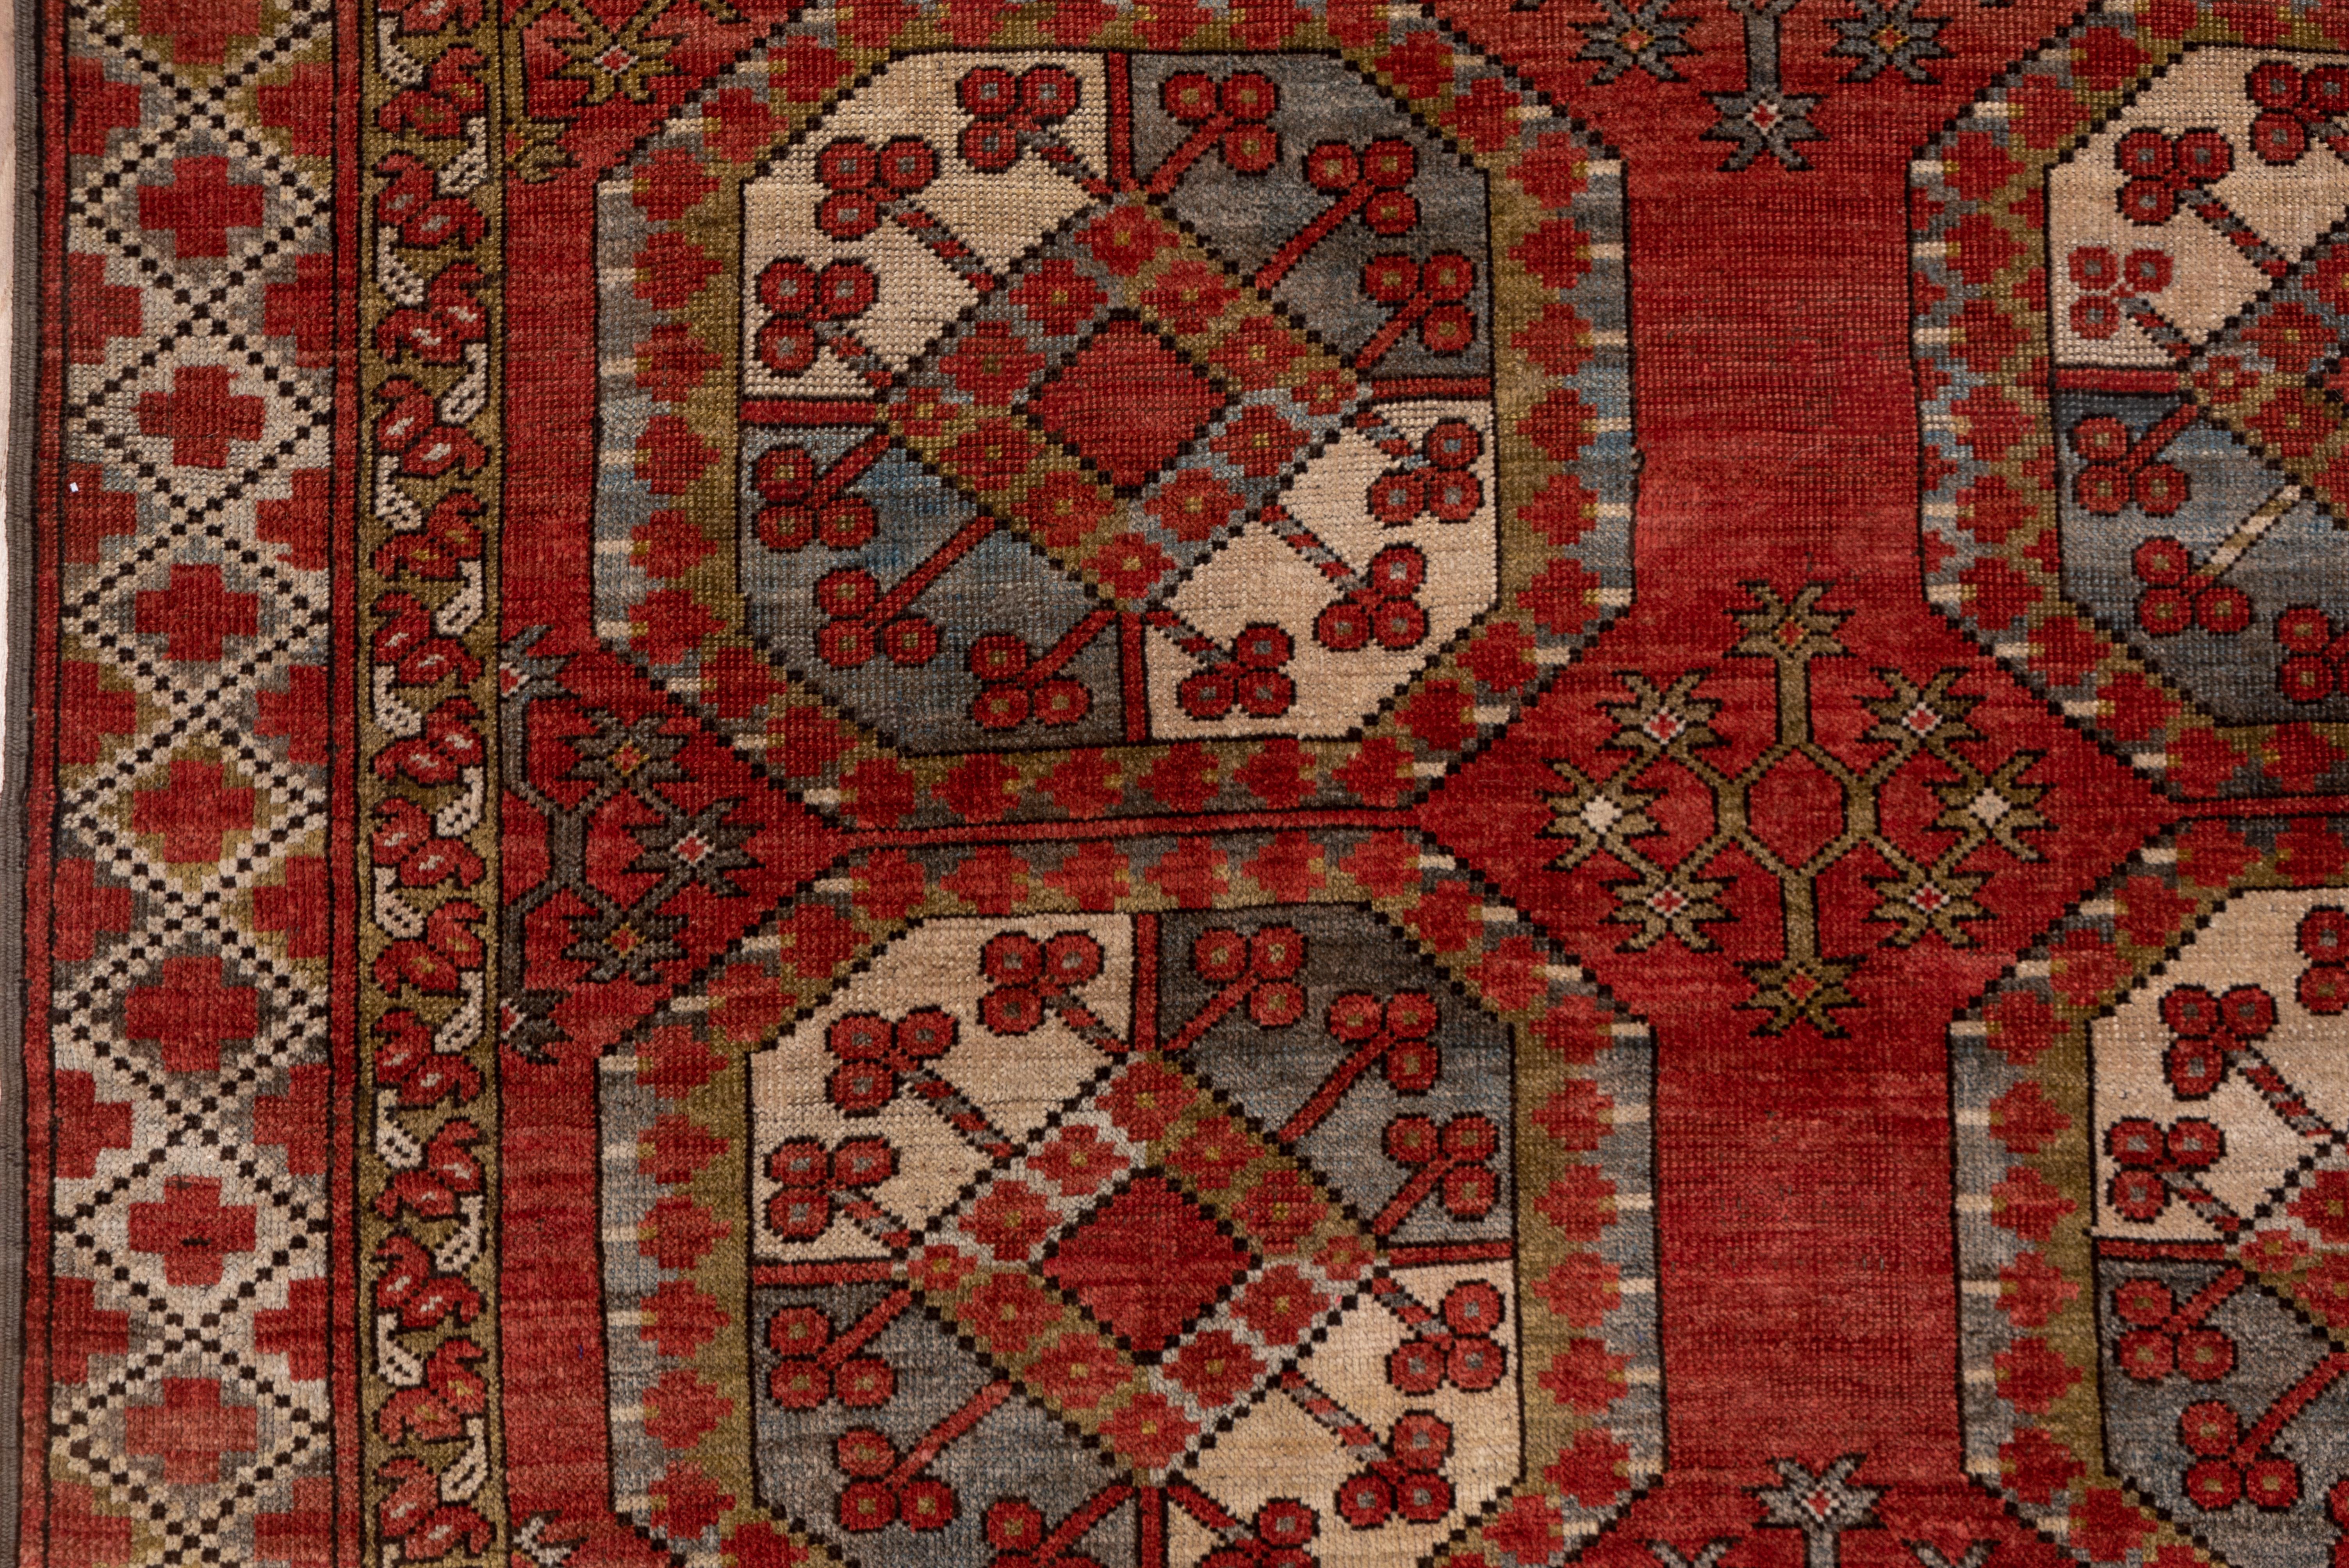 Early 20th Century Antique Afghan Ersari Carpet, Red Field, Allover Field